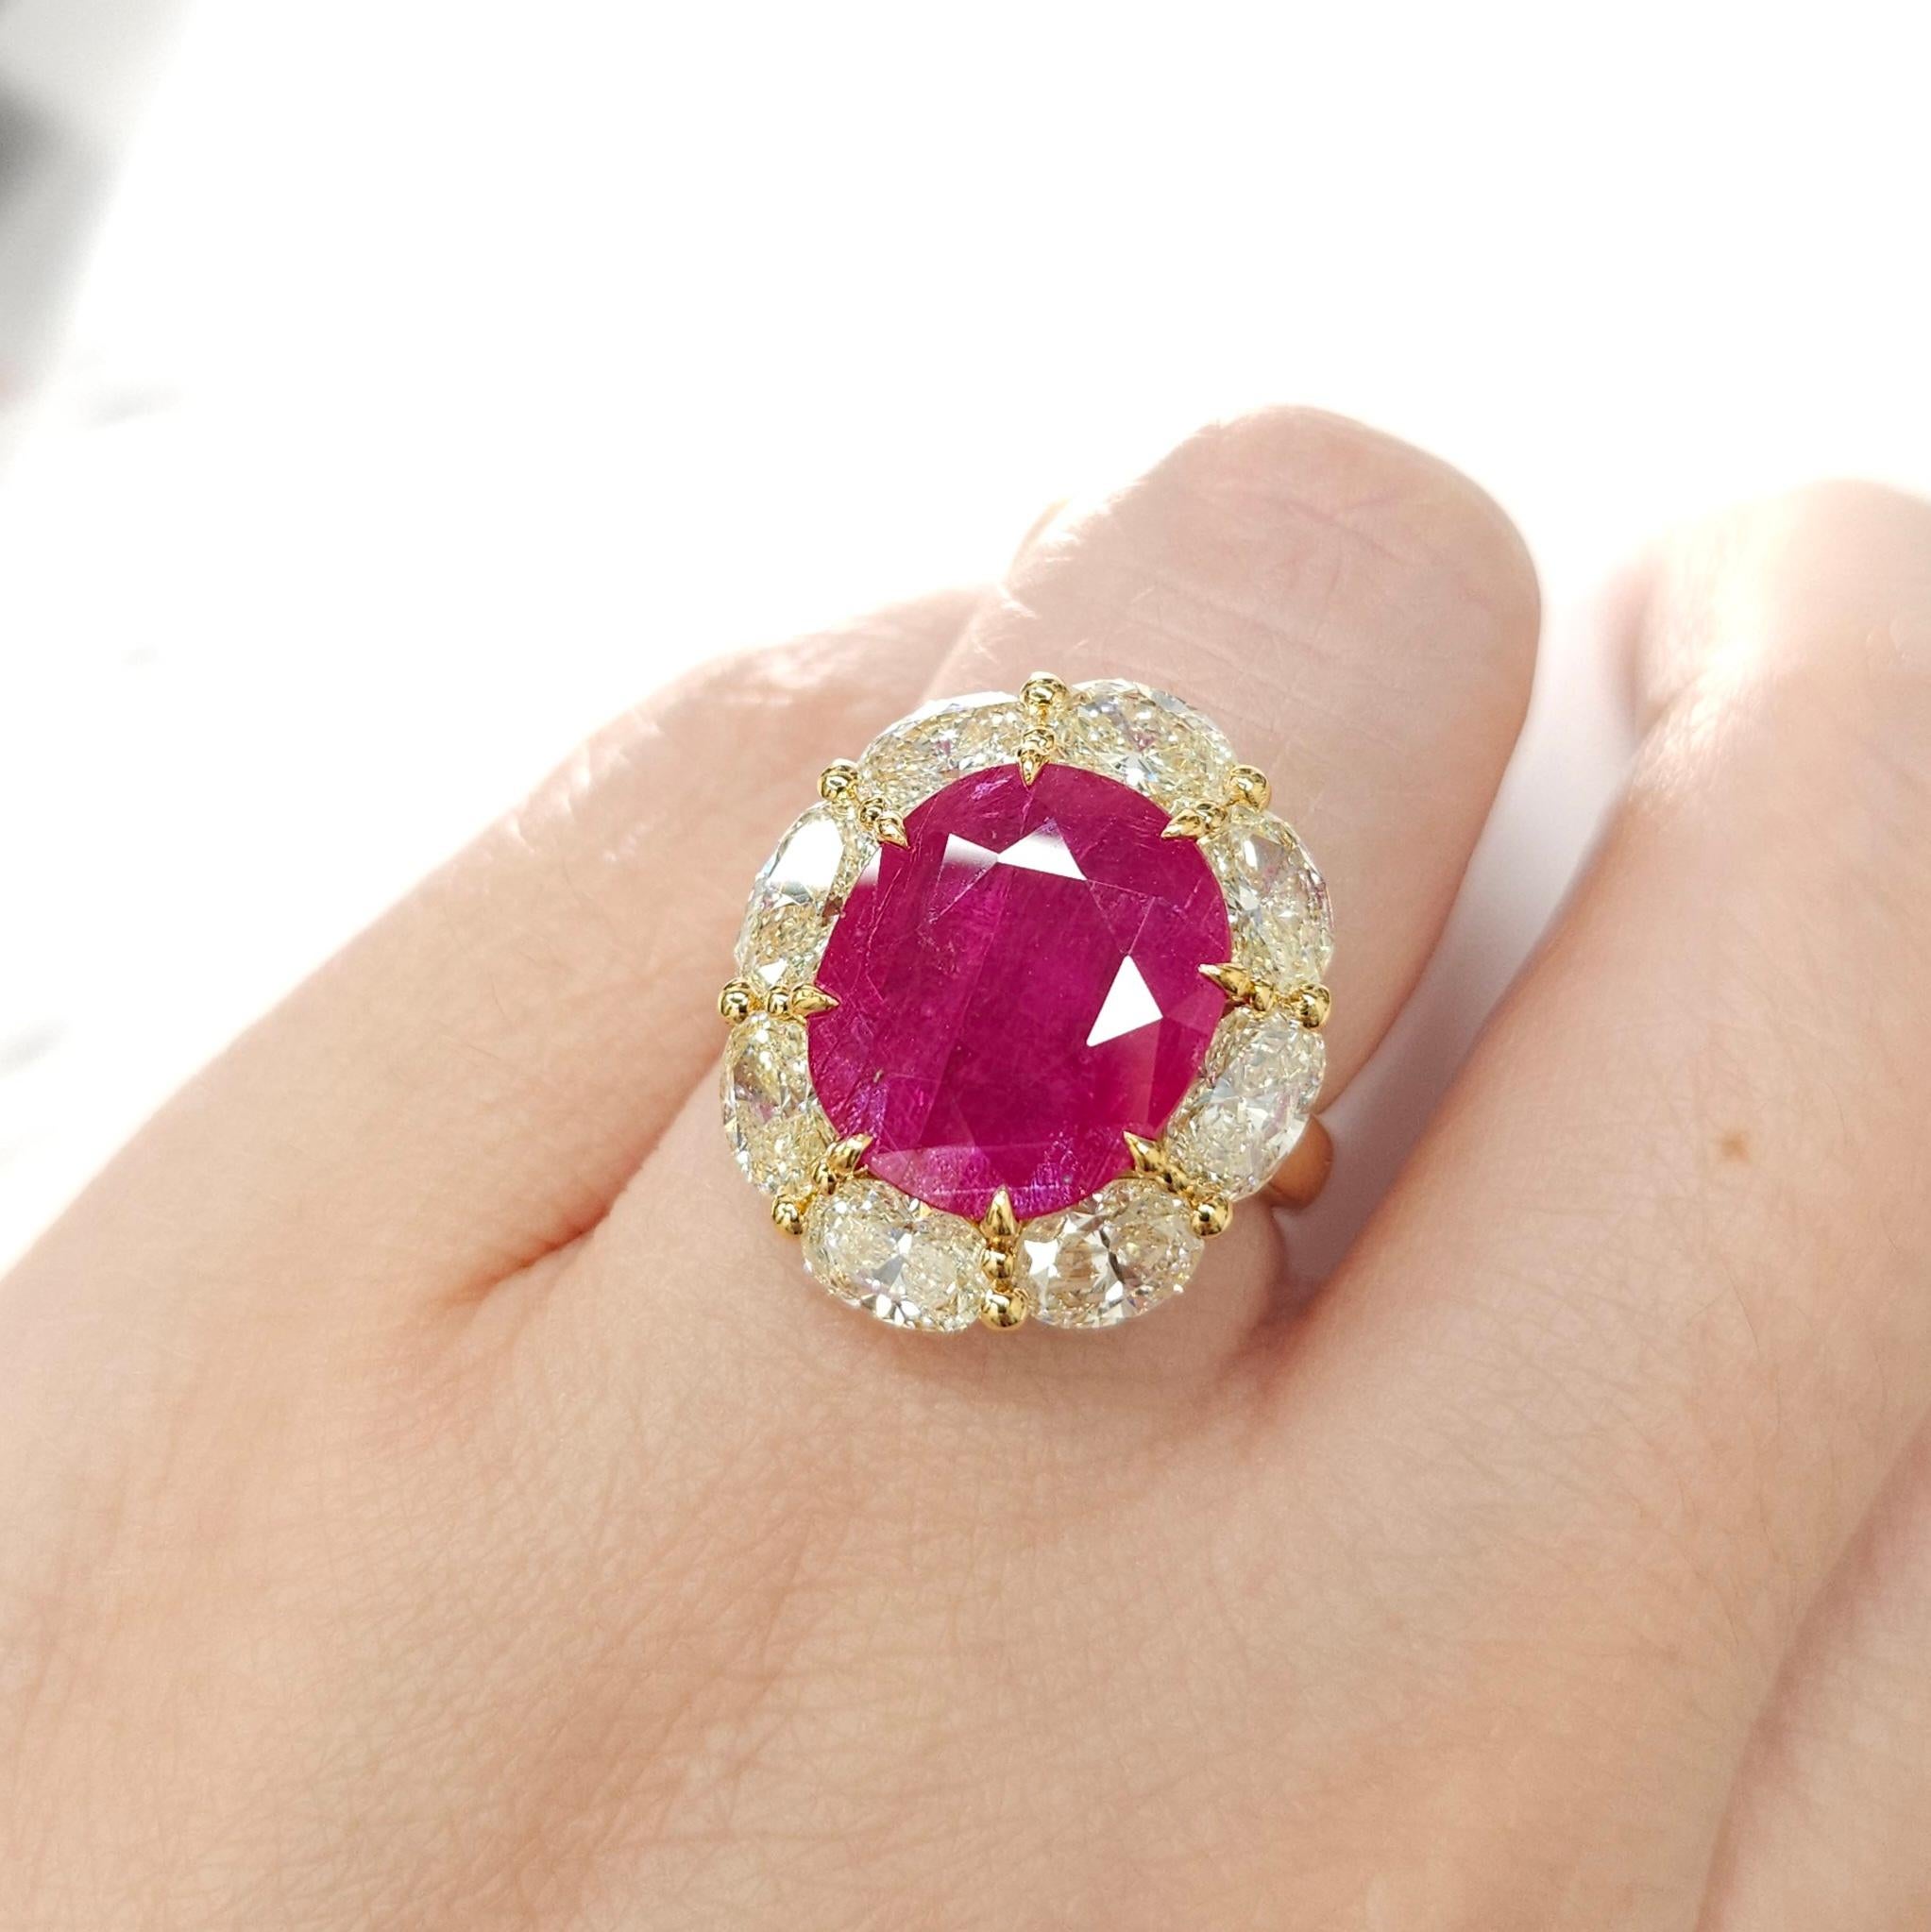 IGI Certified 6.53 Carat Ruby & 3.71 Carat Oval Diamond Ring in 18K Yellow Gold For Sale 2